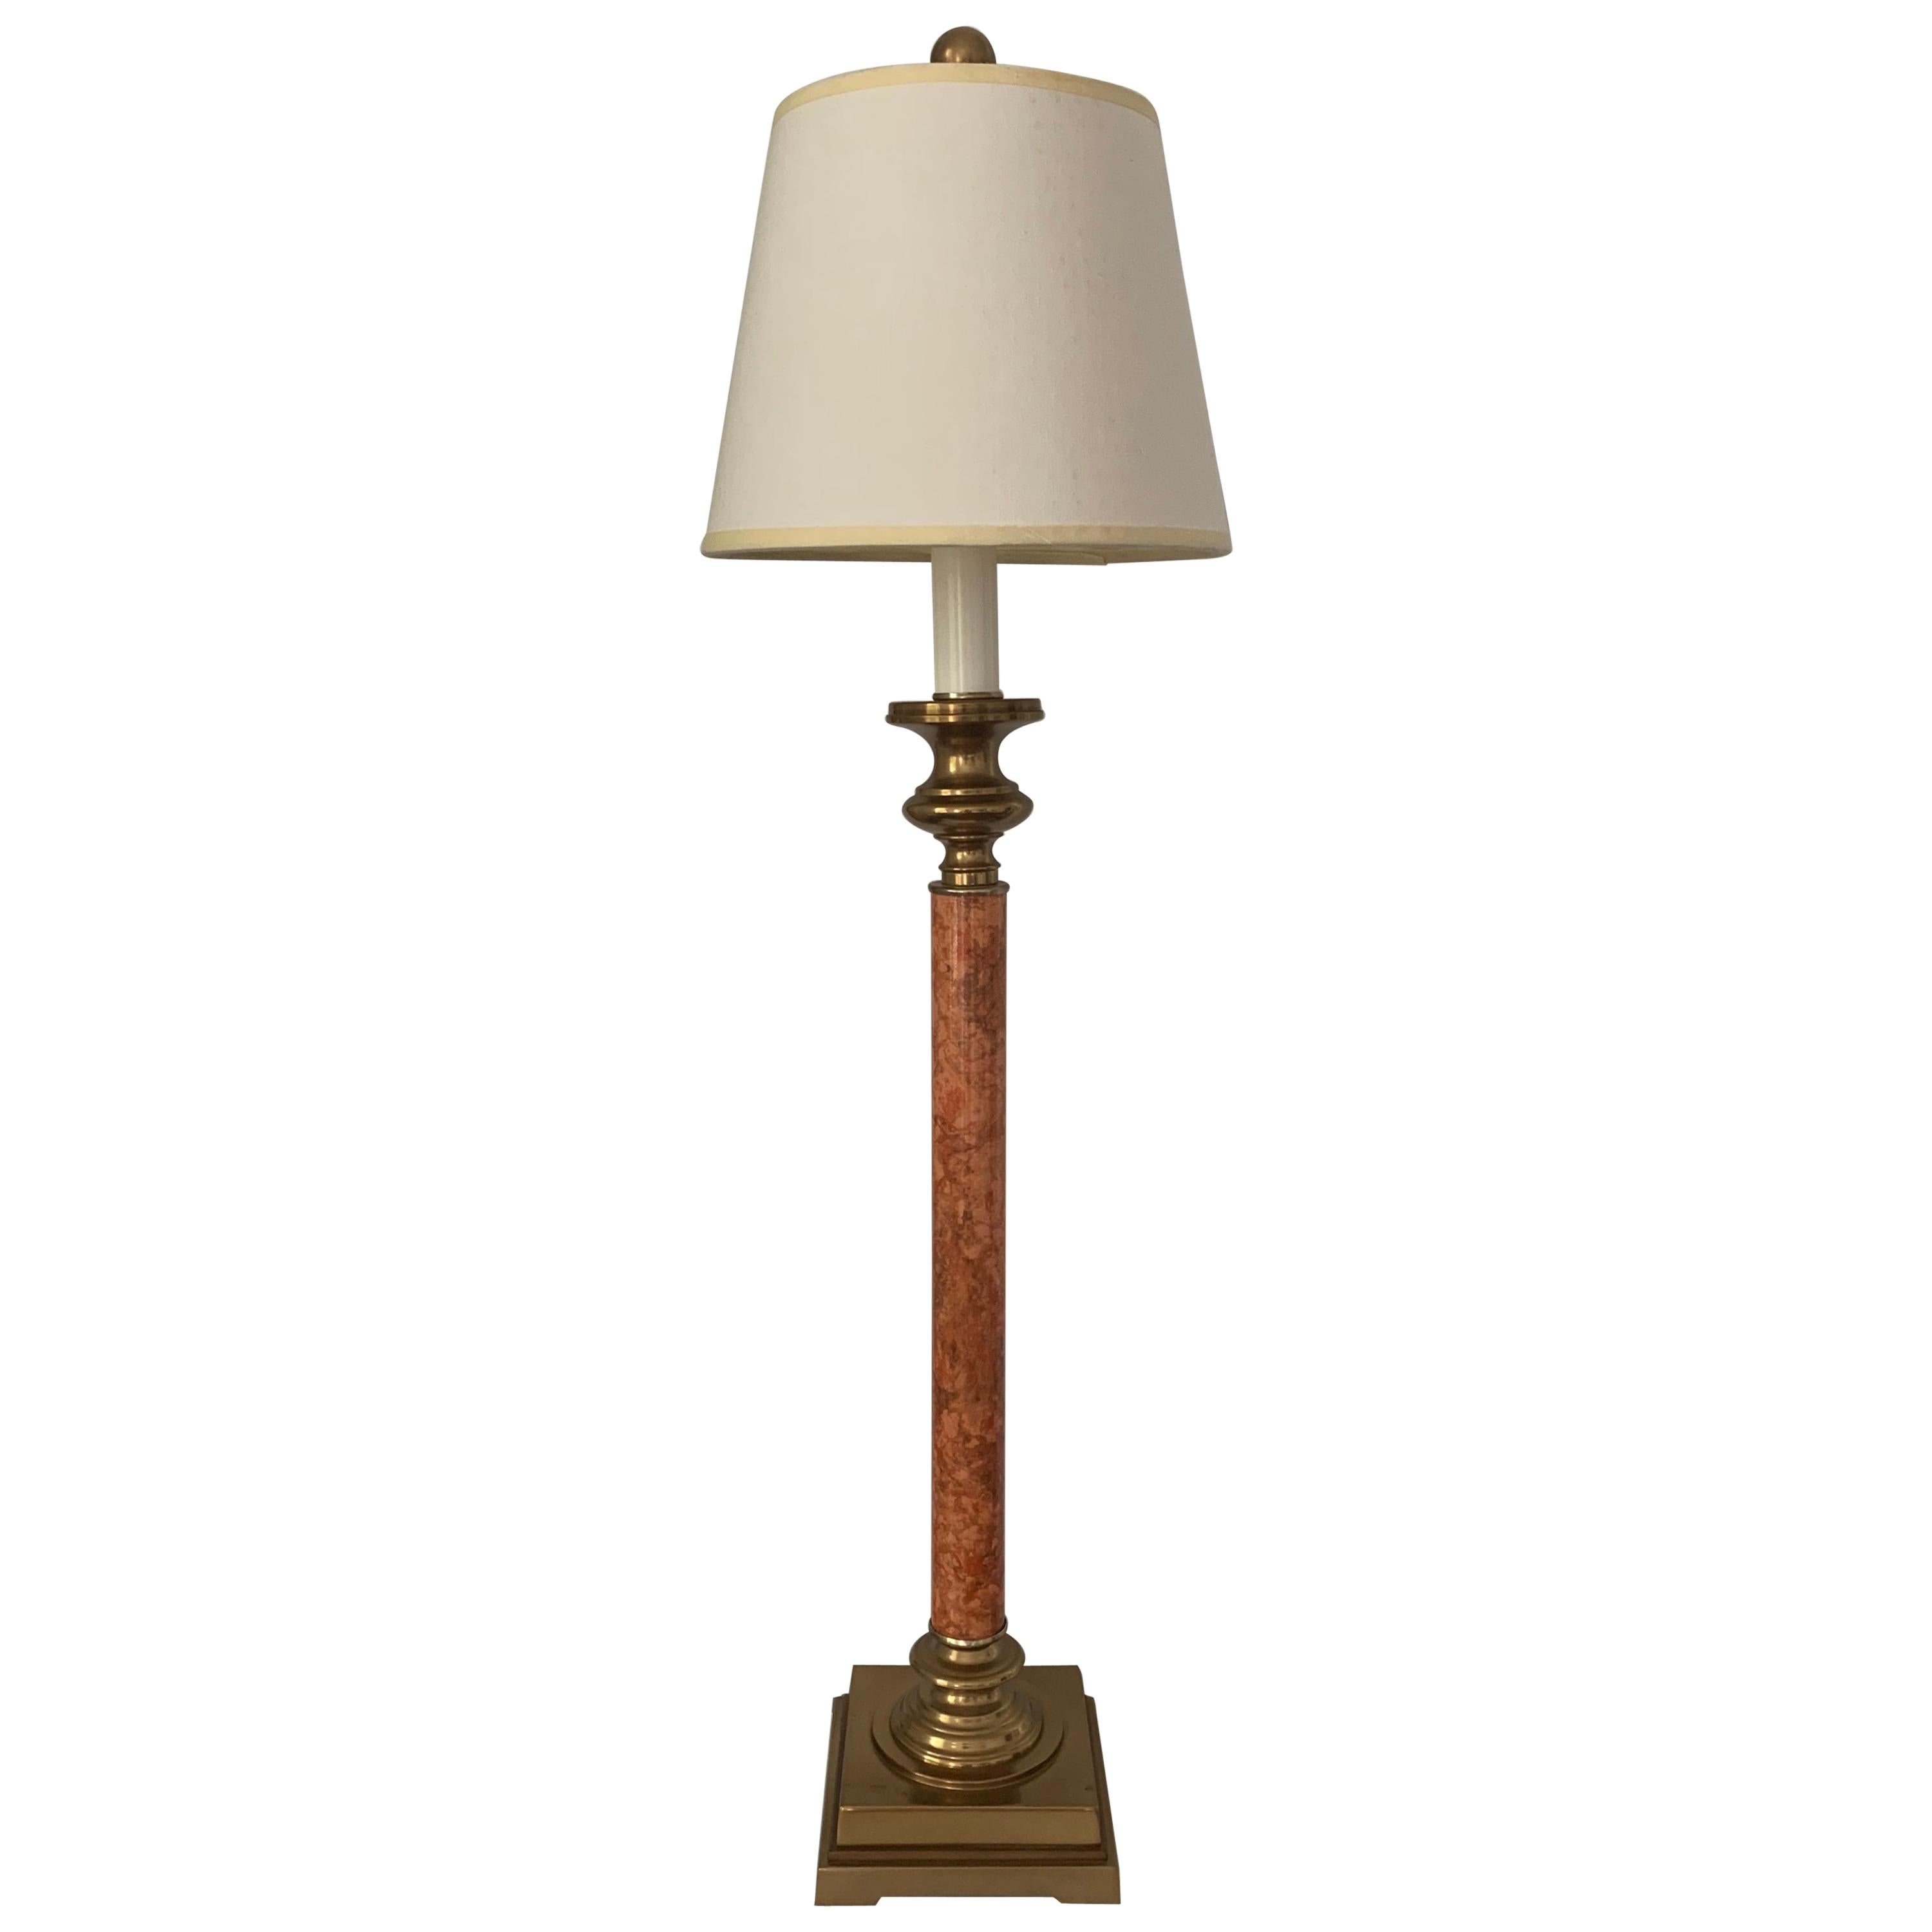 A tall brass candlestick table lamp with marbleized stem. Accented by a brass ball-shaped finial. Unmarked, possibly by Chapman. 

Takes 2 standard US bulbs, 60
watts max each. On/off switch on cord. 

Includes off-white linen